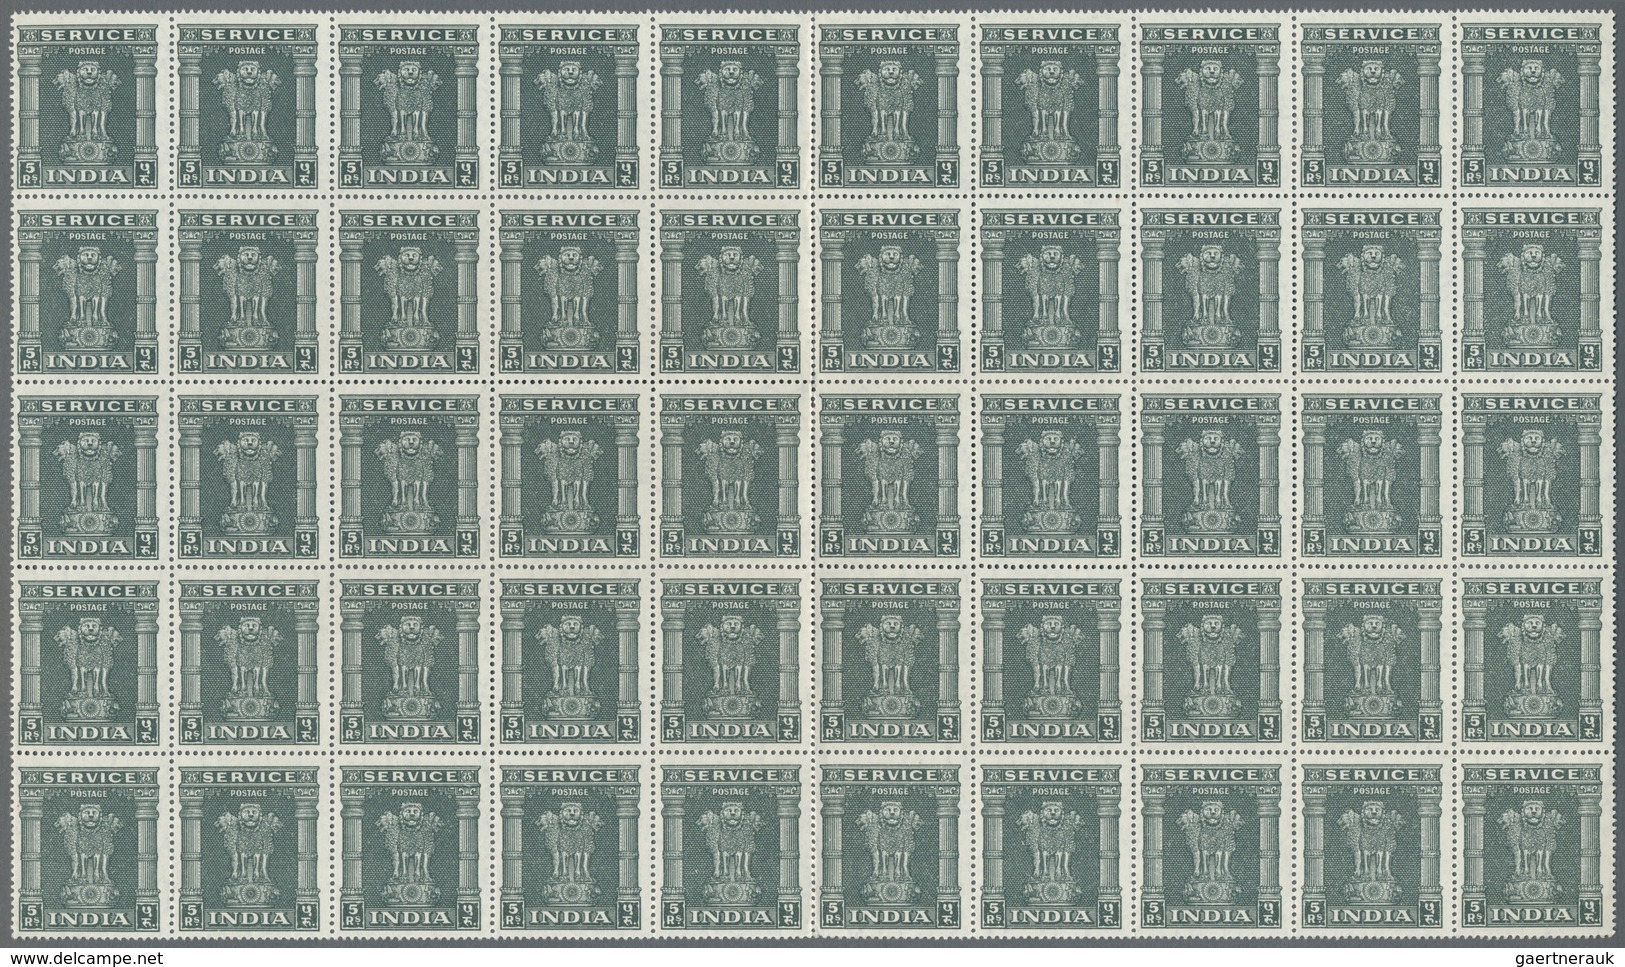 ** Indien - Dienstmarken: 1950, 2, 5 and 10 Rupies, sheetparts with totally 200 of each value, mnh, CV